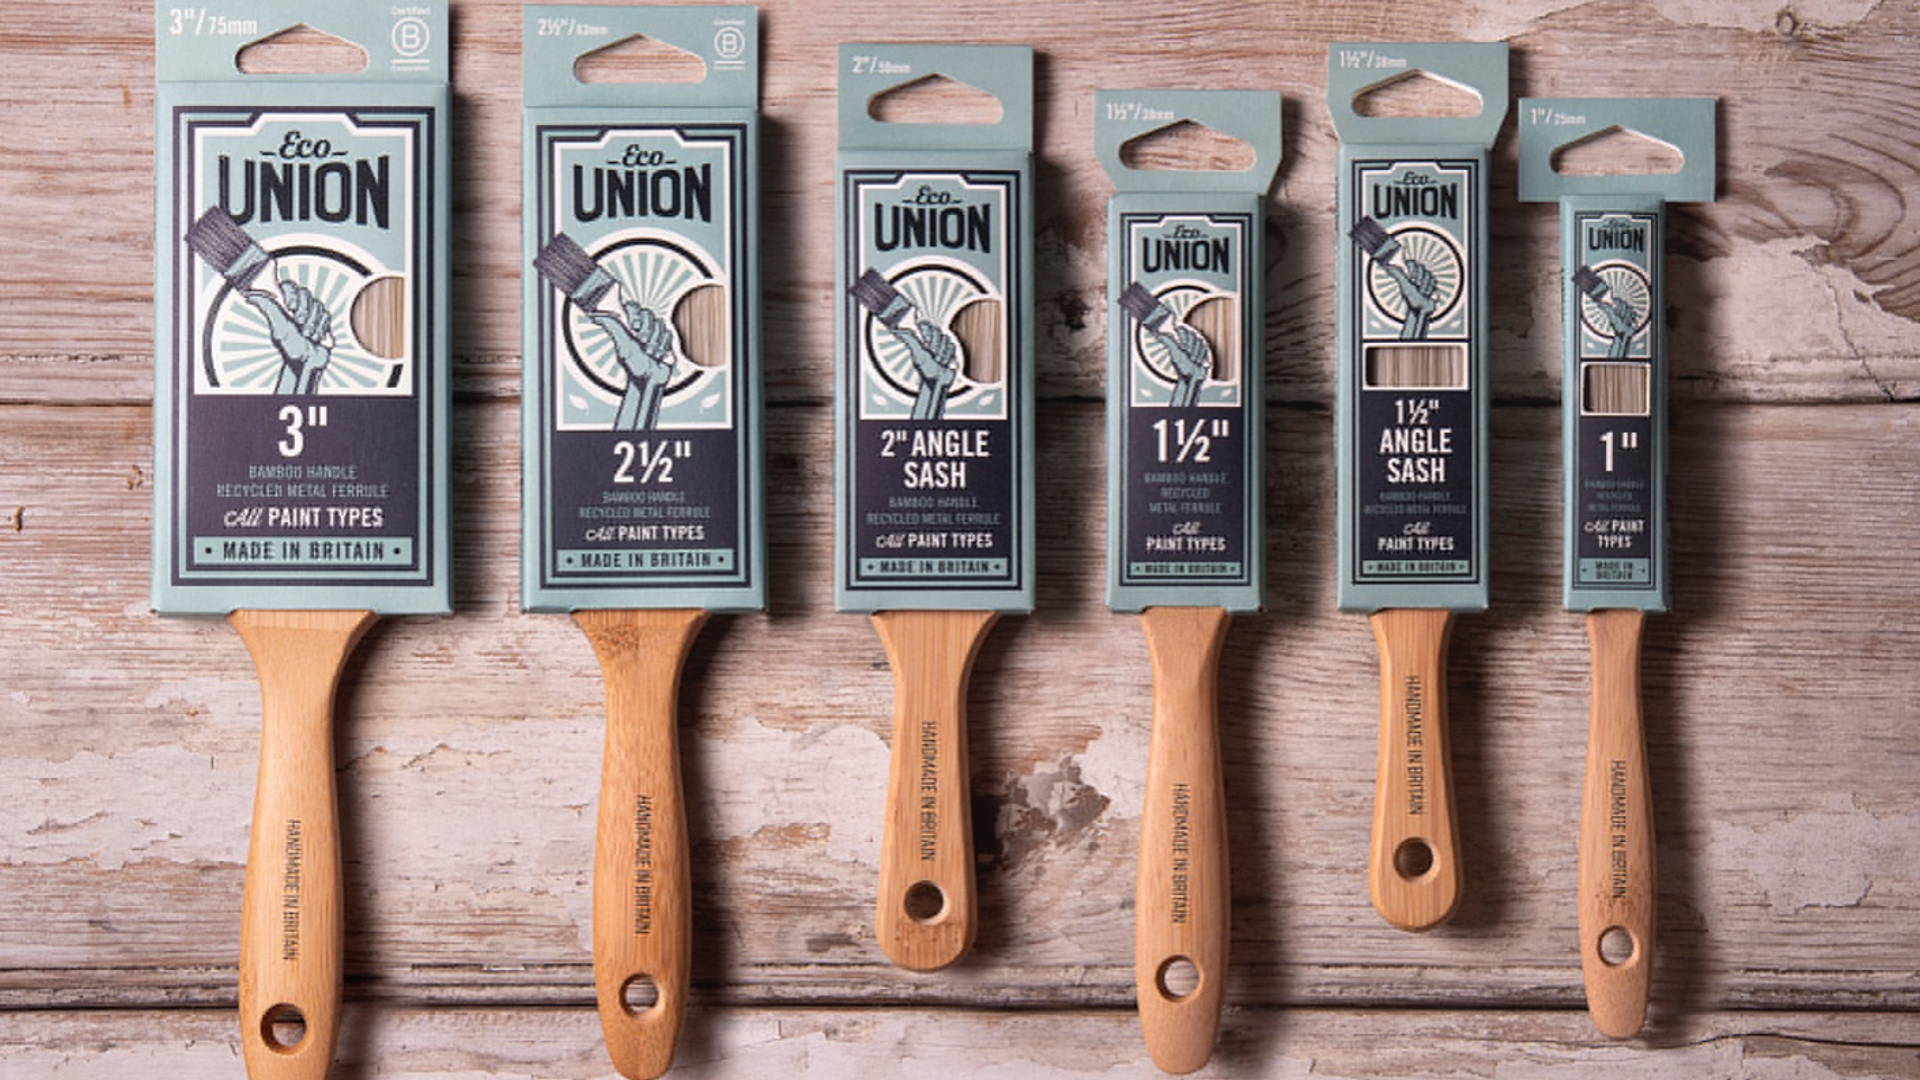 Featured image for Eco Union Tools That Don't Cost The Earth